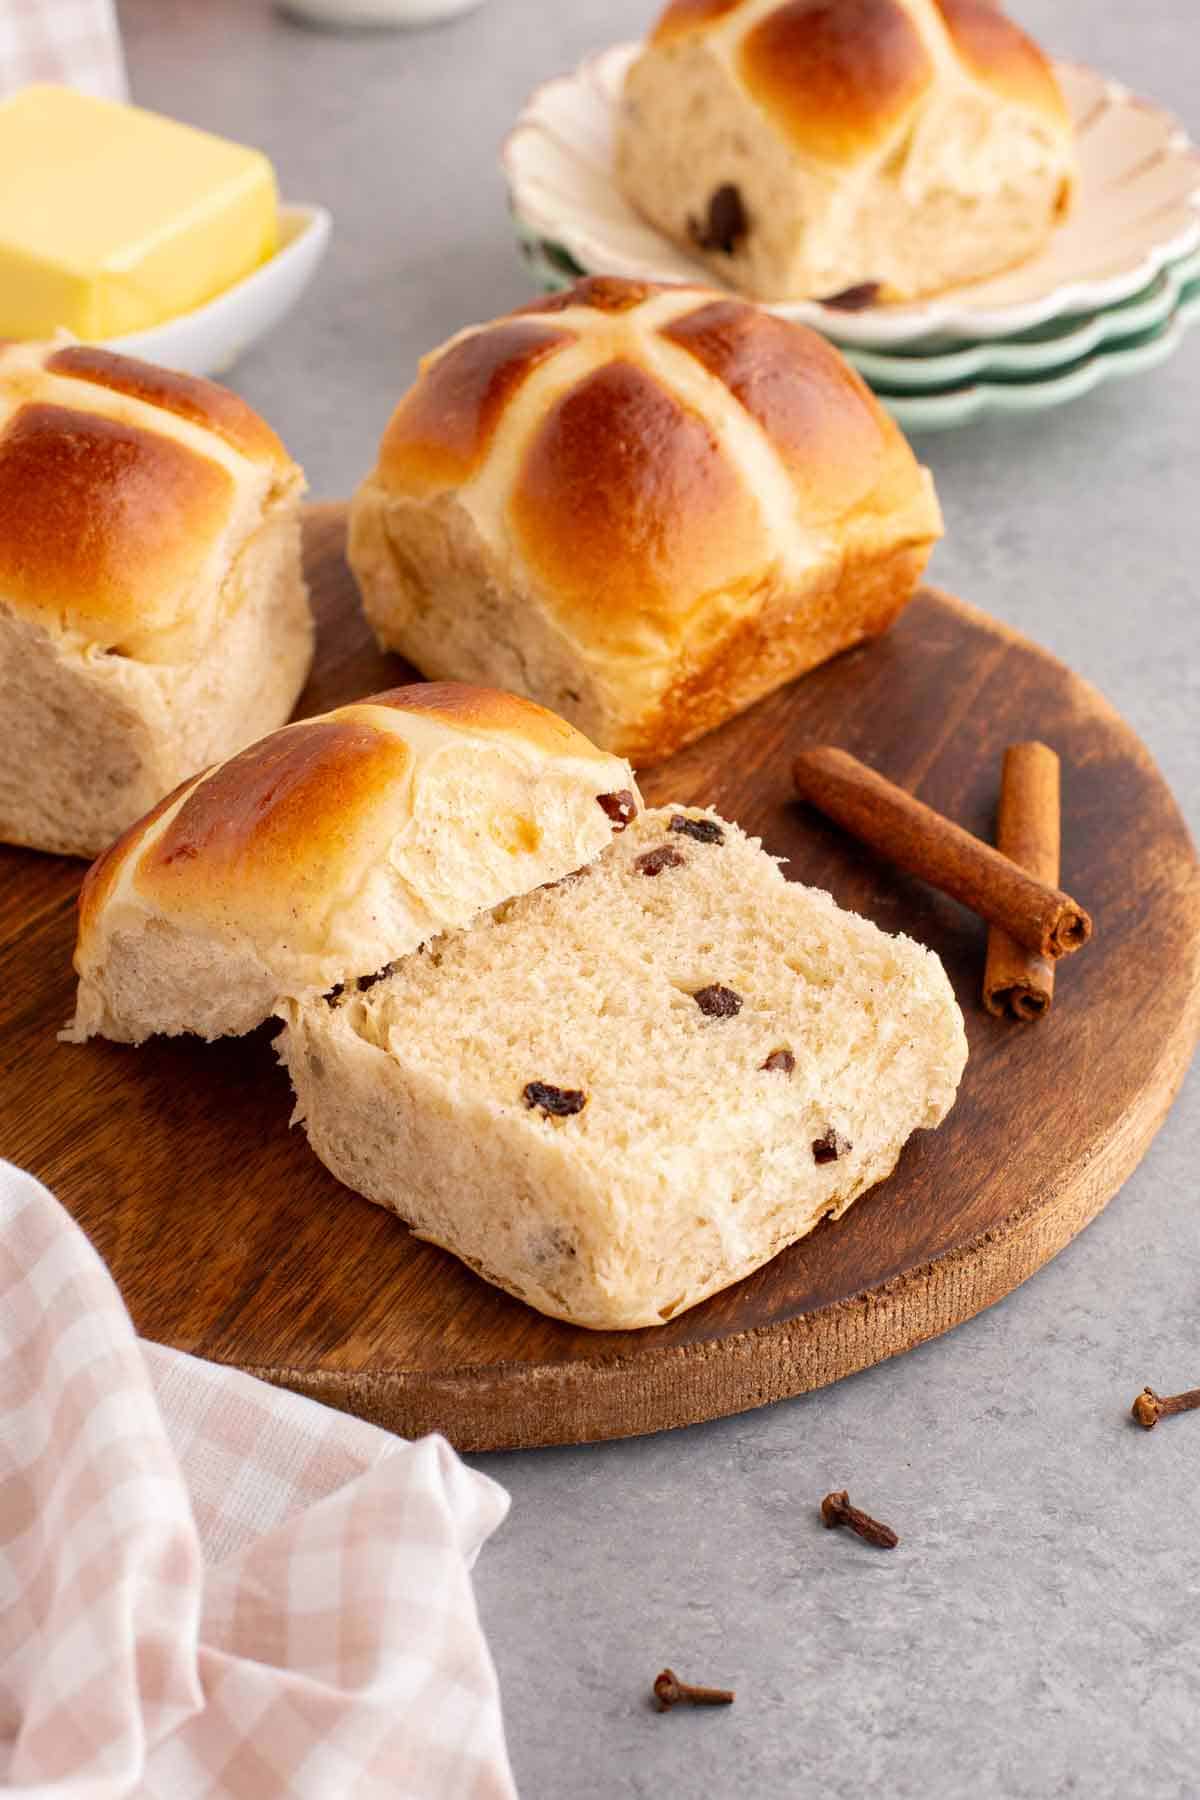 Hot Cross Buns with Currants